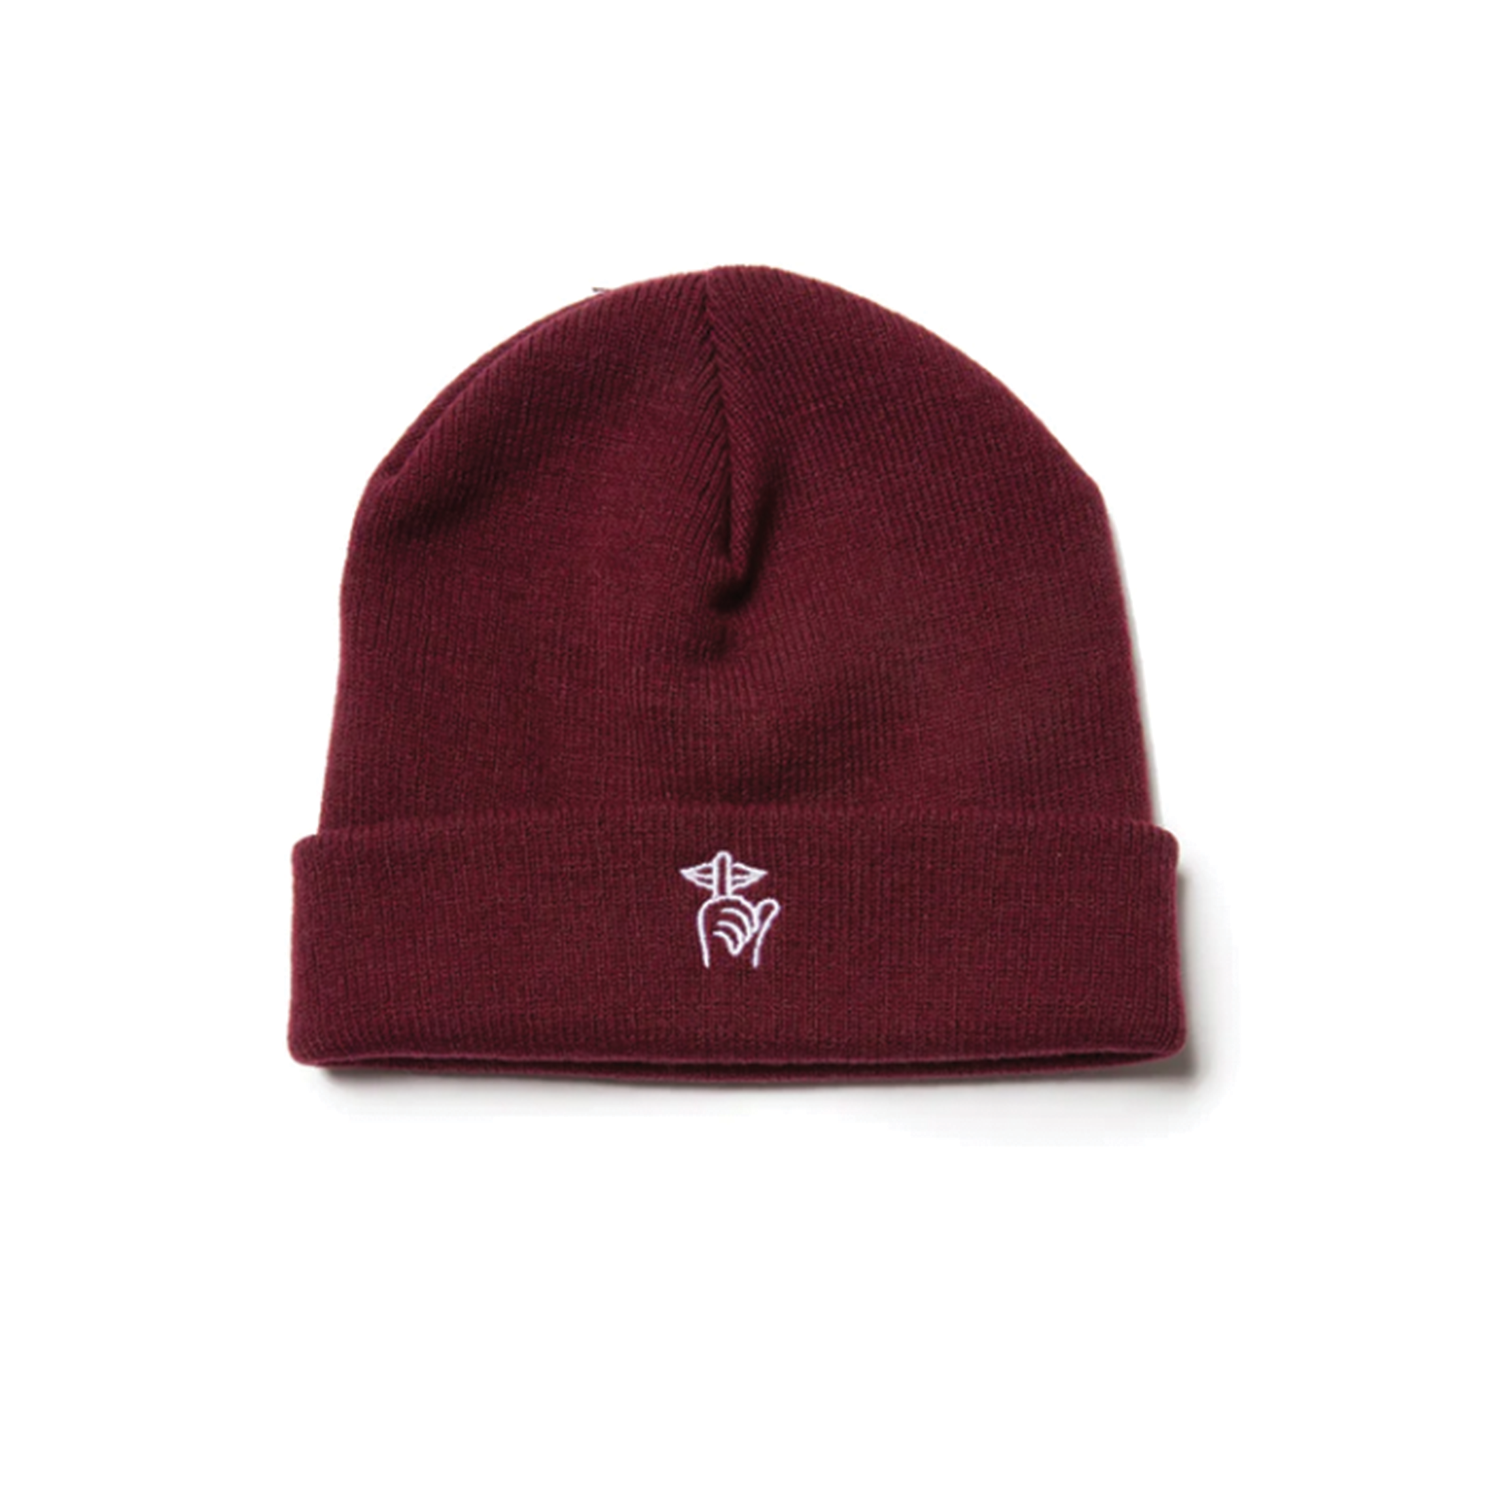 THE QUIET LIFE SHHH BEANIE CARDINAL RED